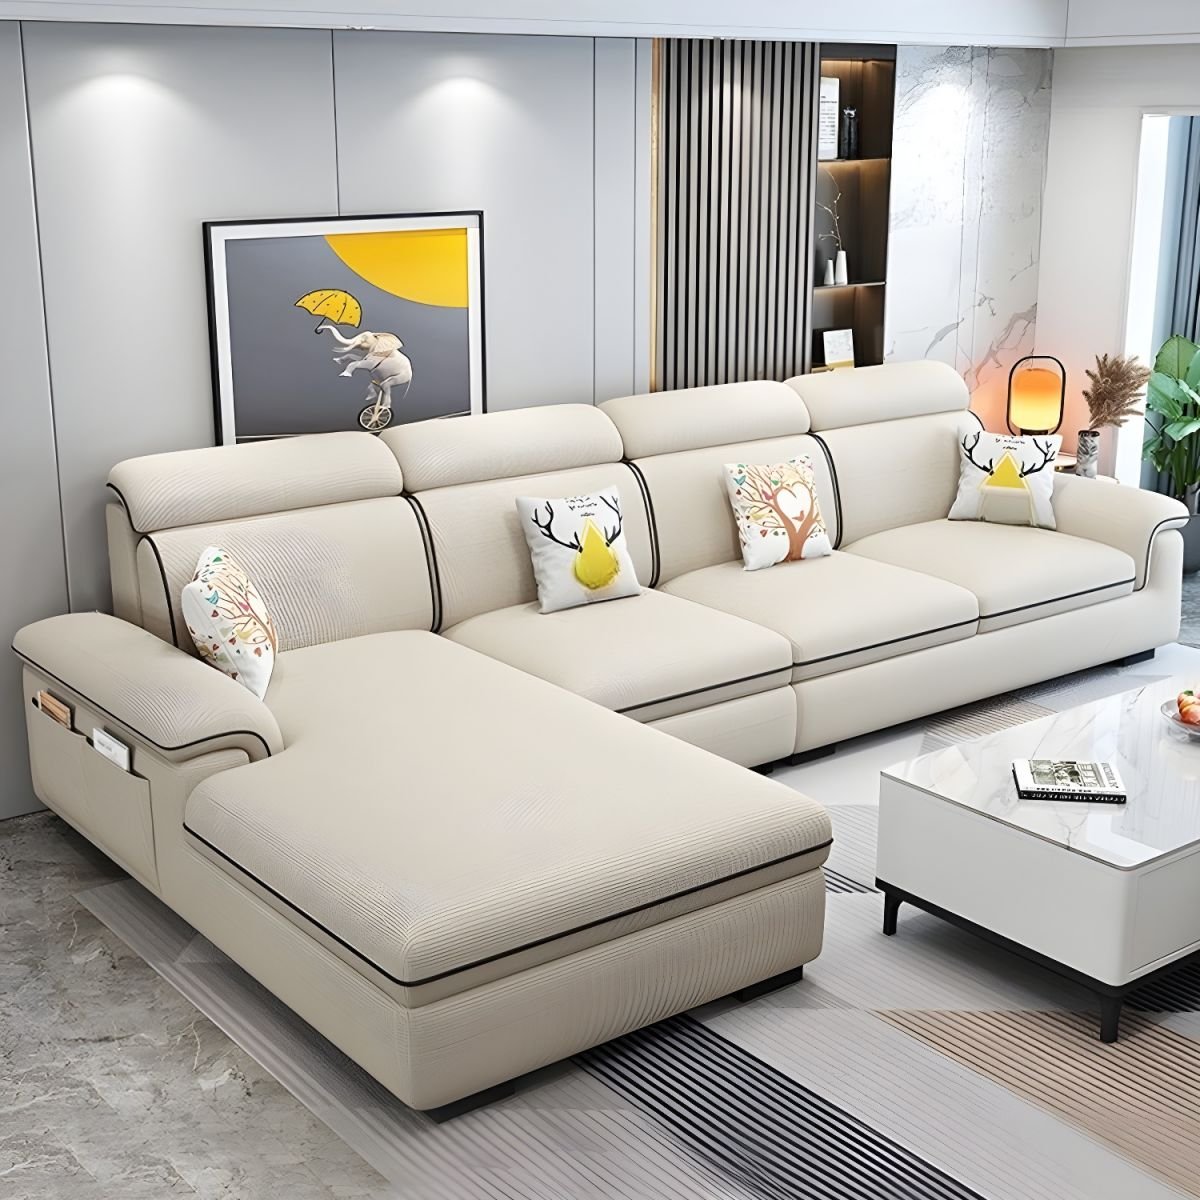 Wooden Modern 9 Feet L-Shape Sectionals No Distressing Seats 4 Storage Included Sofa Chaise - Linen Off-White Left